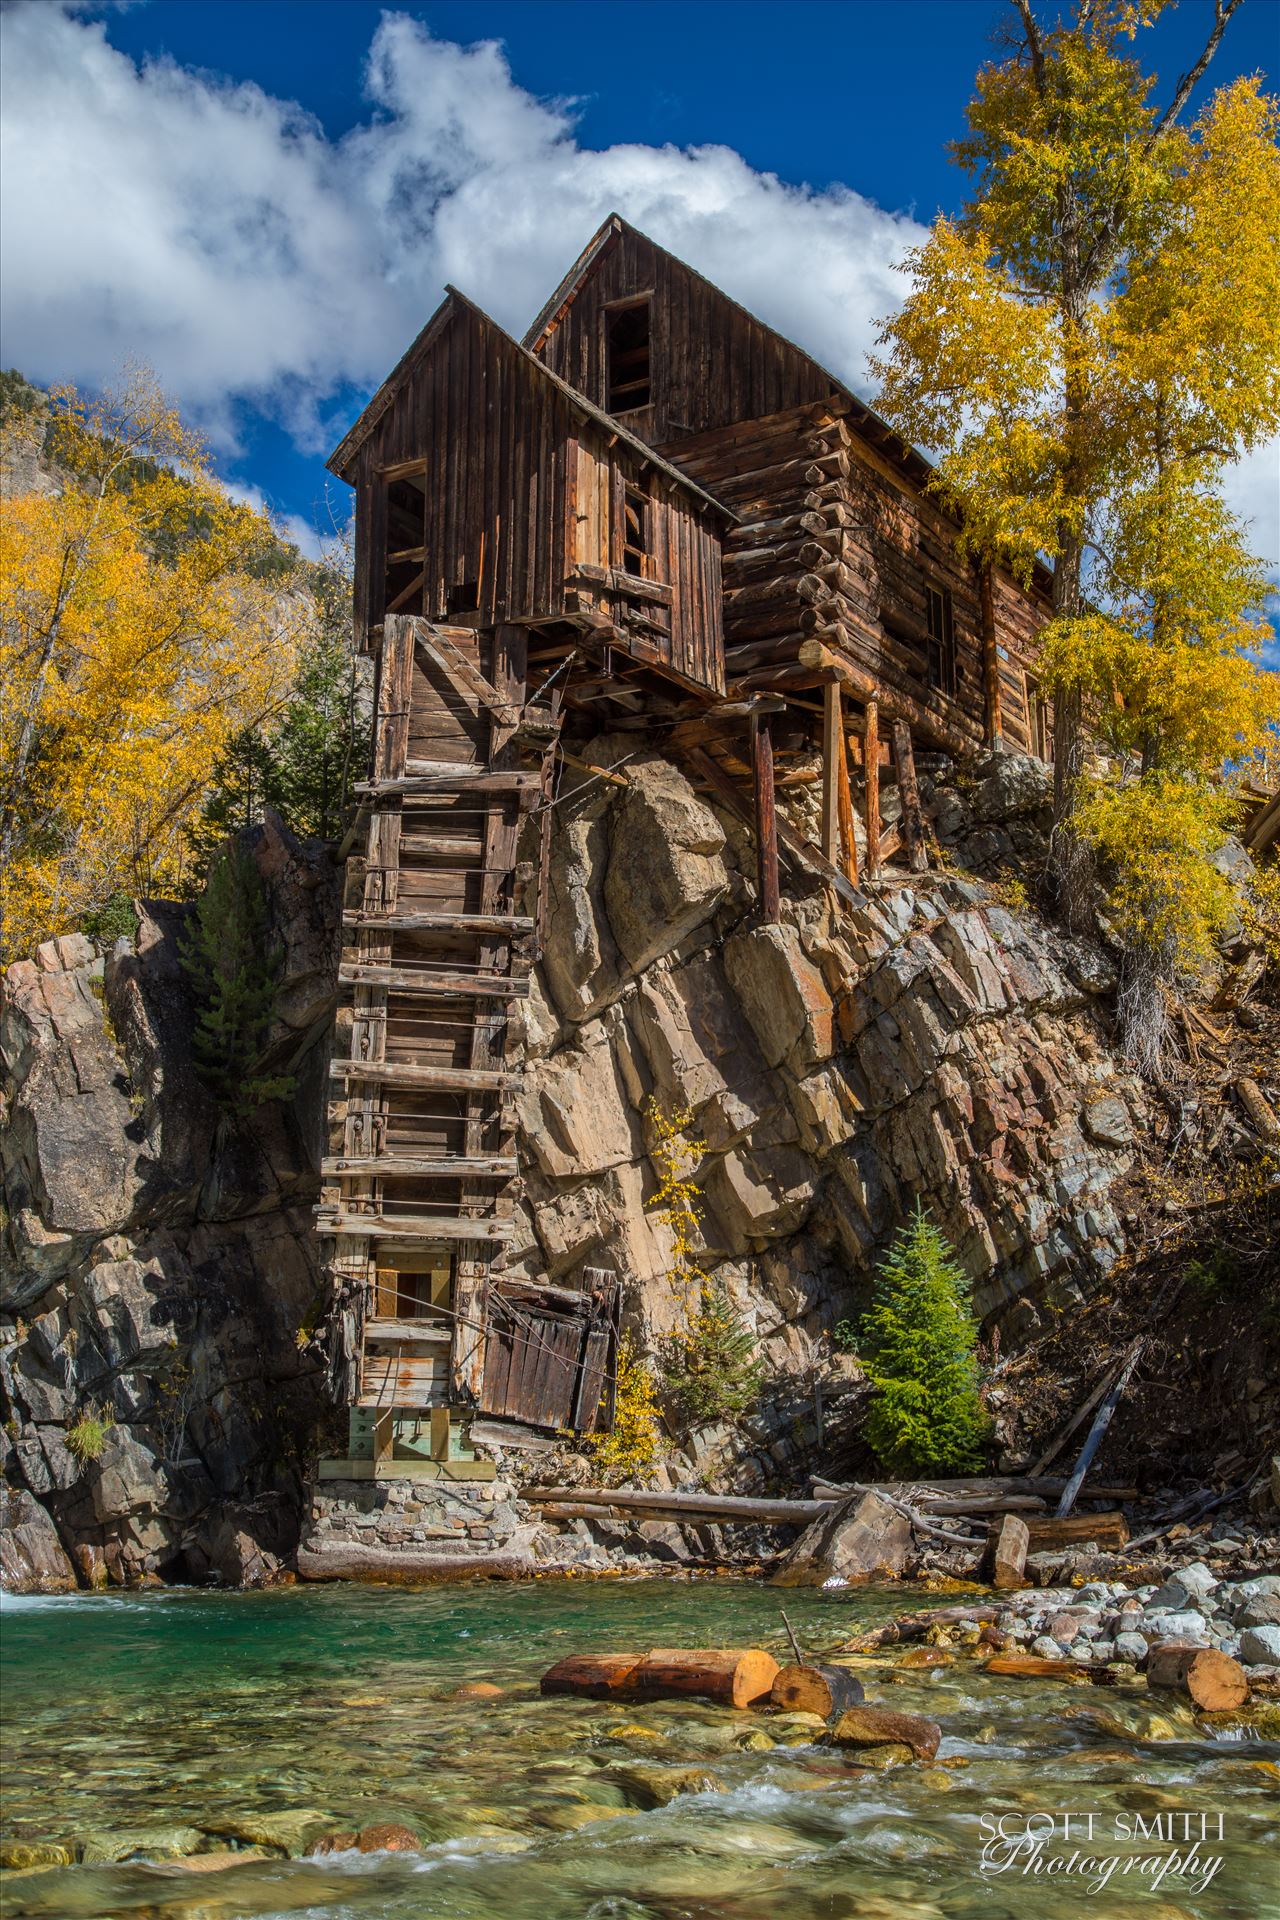 Crystal Mill, Colorado 14 - The Crystal Mill, or the Old Mill is an 1892 wooden powerhouse located on an outcrop above the Crystal River in Crystal, Colorado by Scott Smith Photos